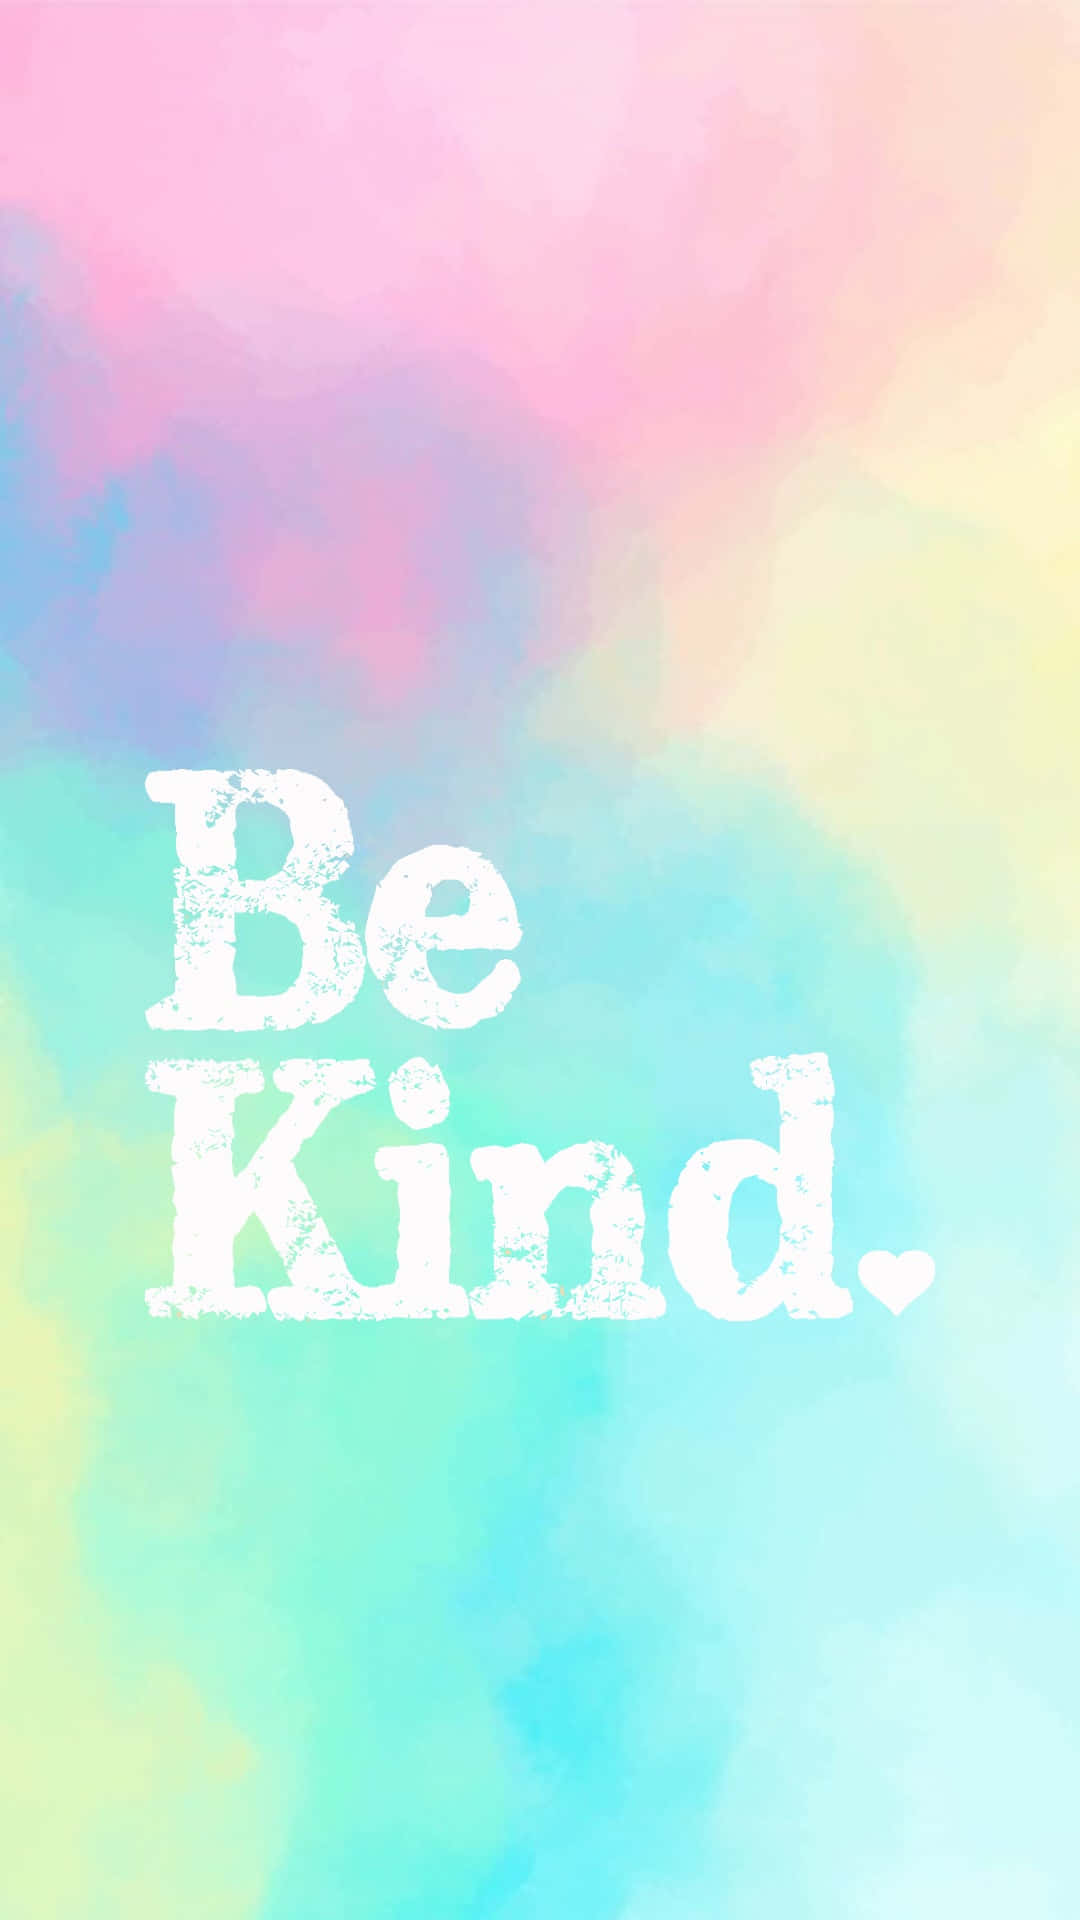 Be Kind - It Could Make Someone's Day Wallpaper